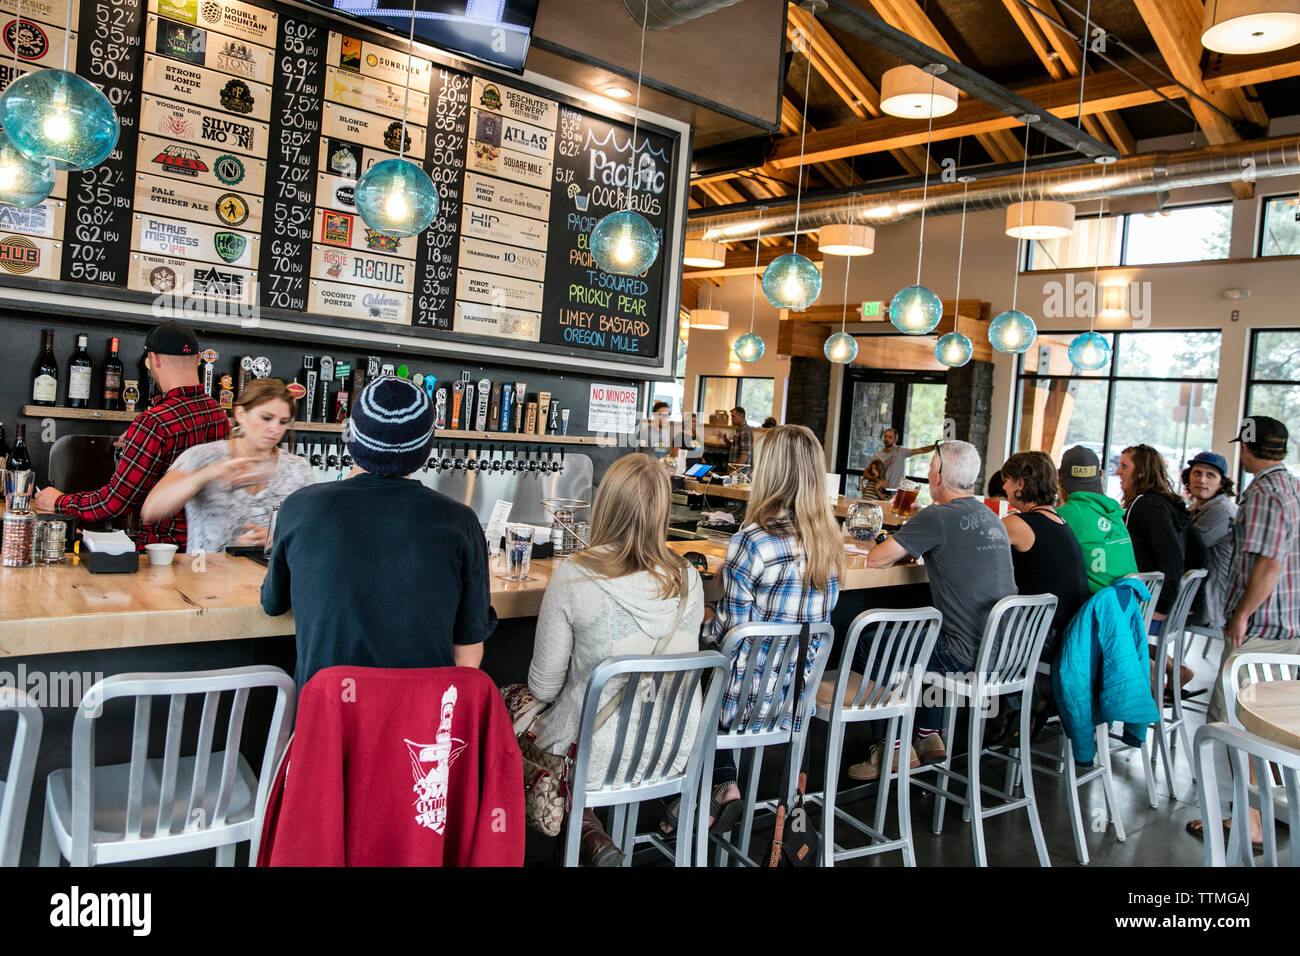 USA, Oregon, Bend, Pacific Pizza and Brew, people at bar Stock Photo